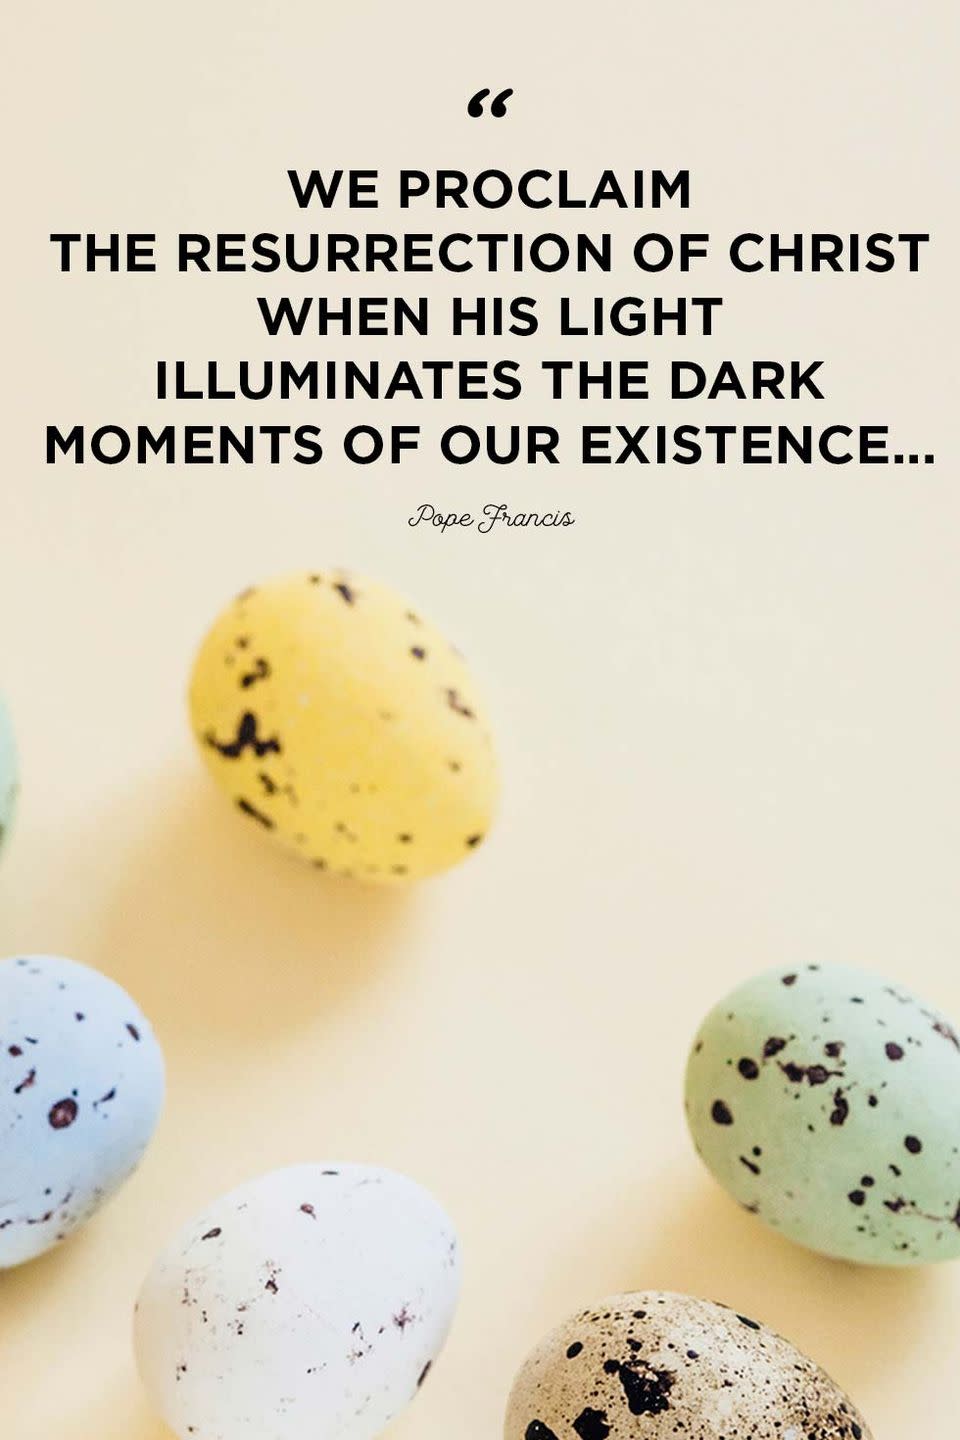 These Moving Easter Quotes Will Inspire Hope and Renewal